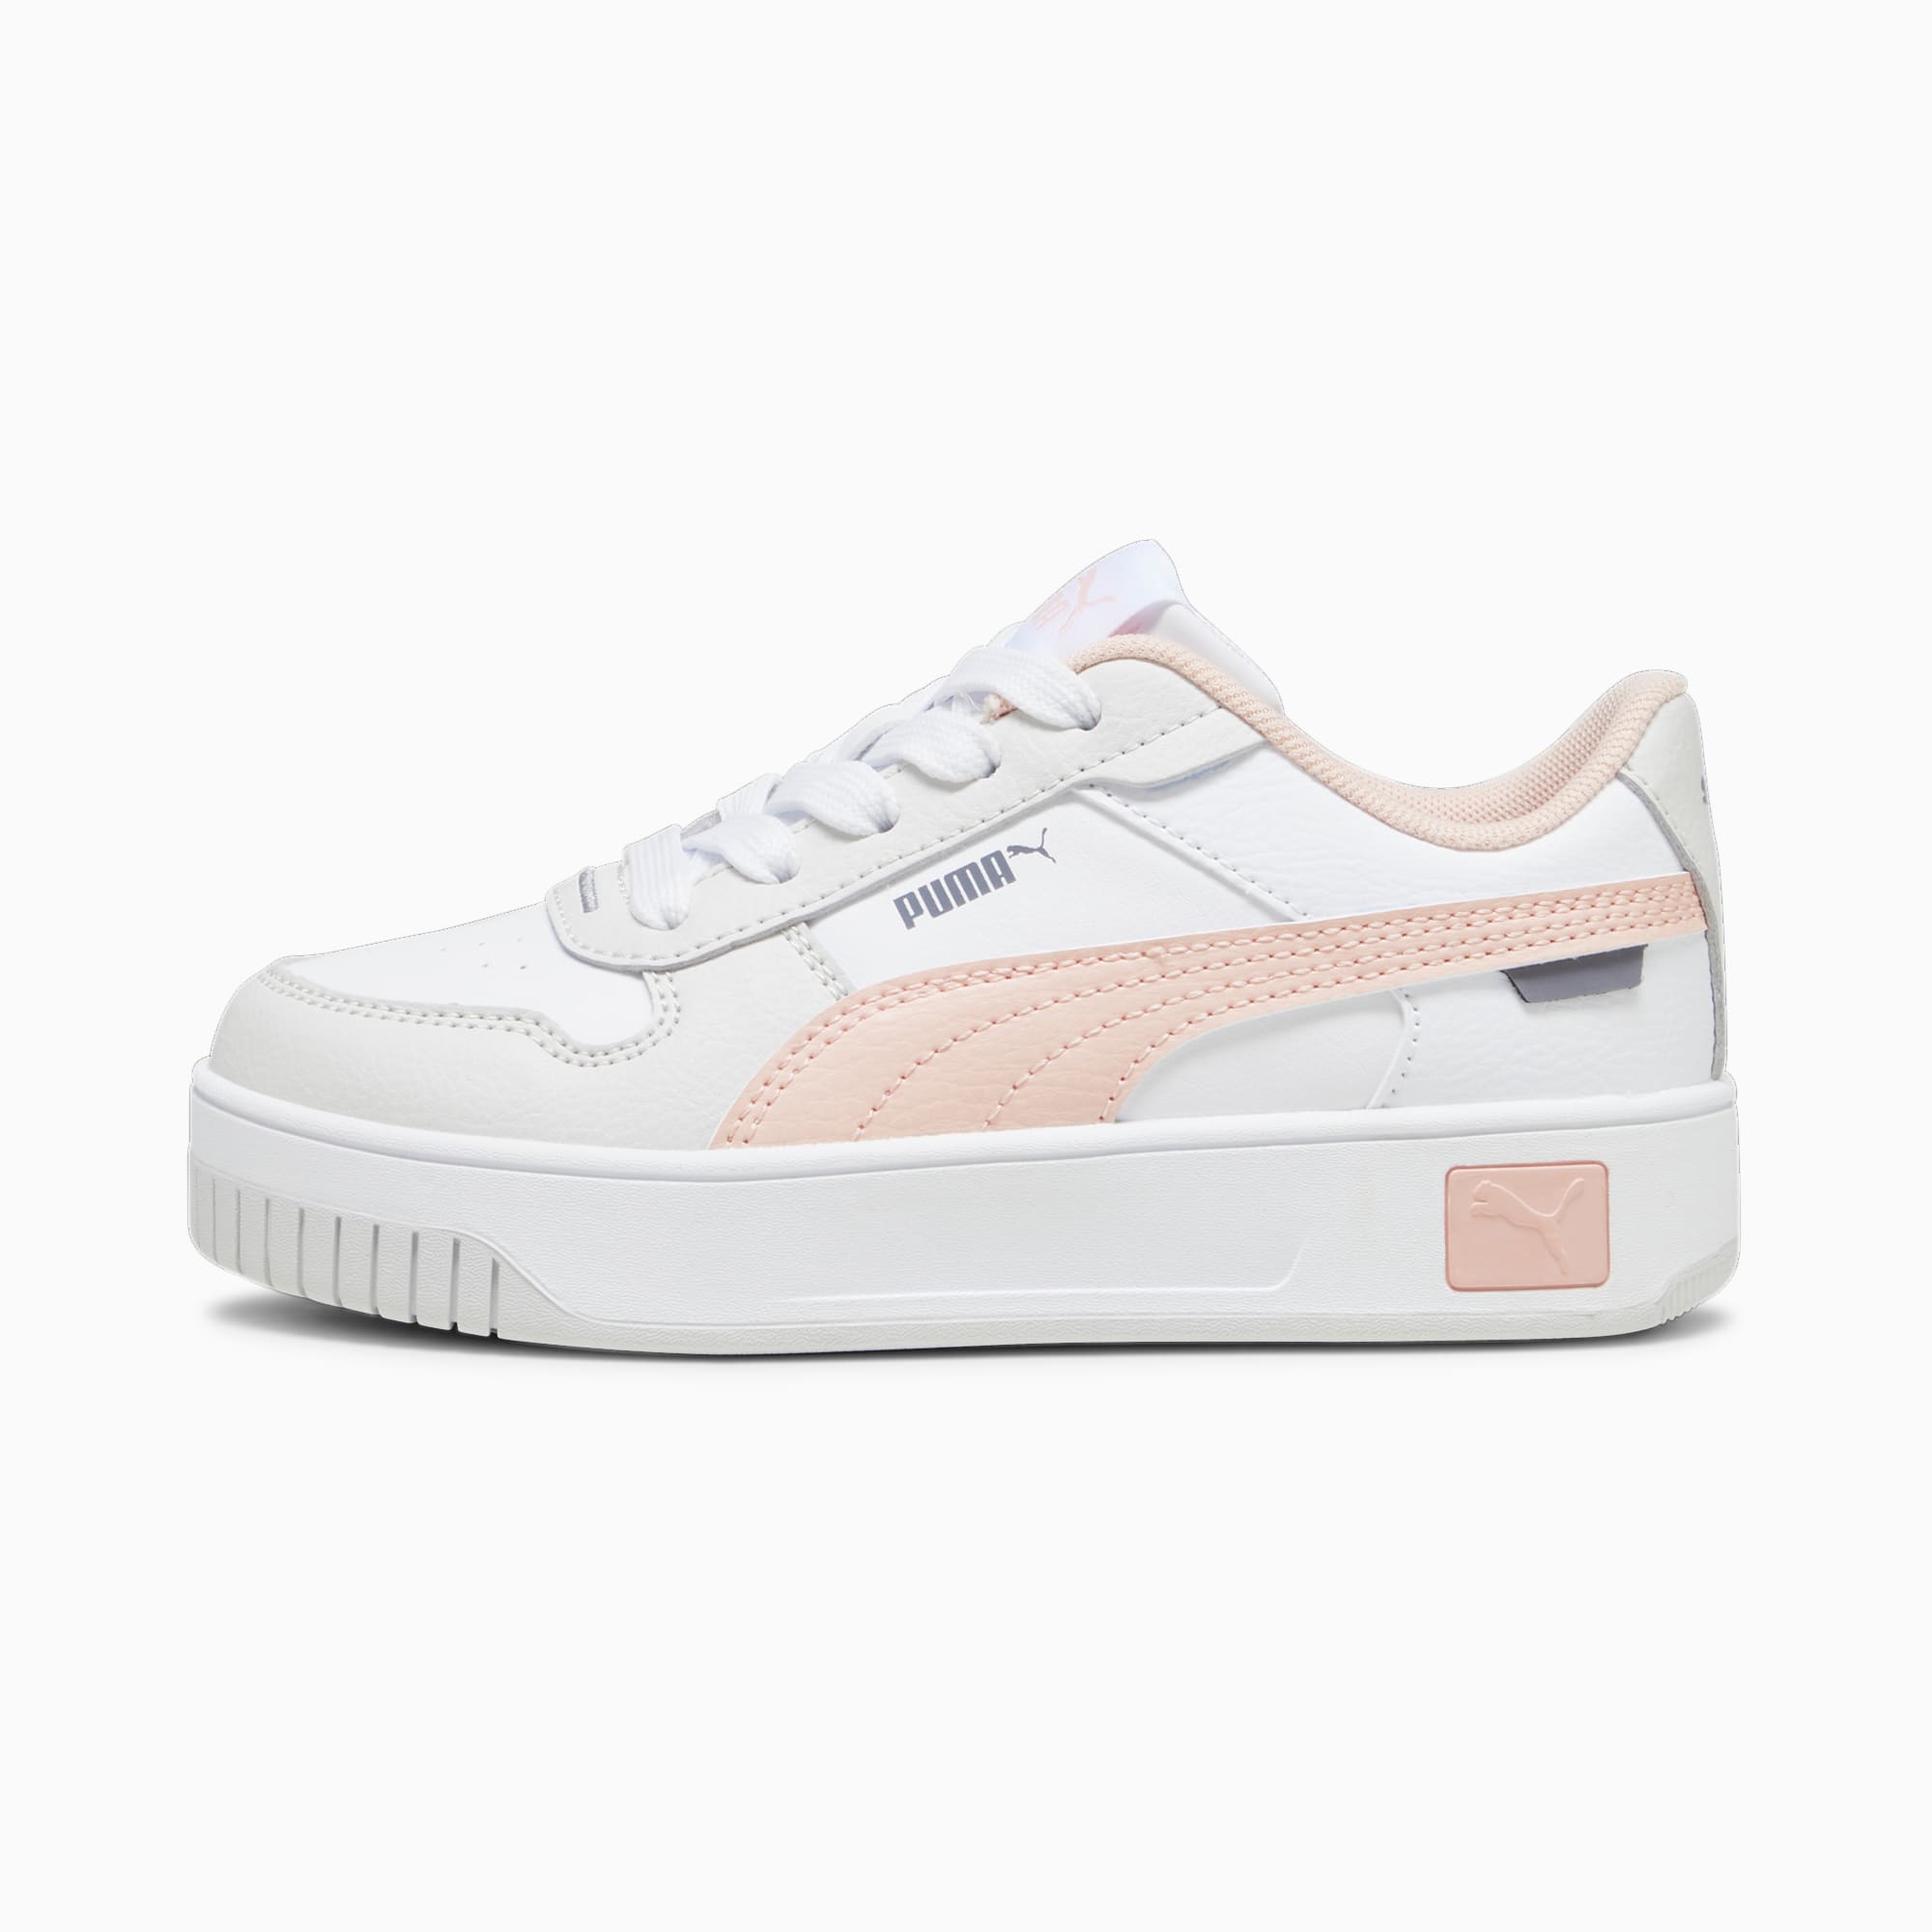 PUMA Carina Street Kids' Sneakers, White/Rose Dust/Feather Grey